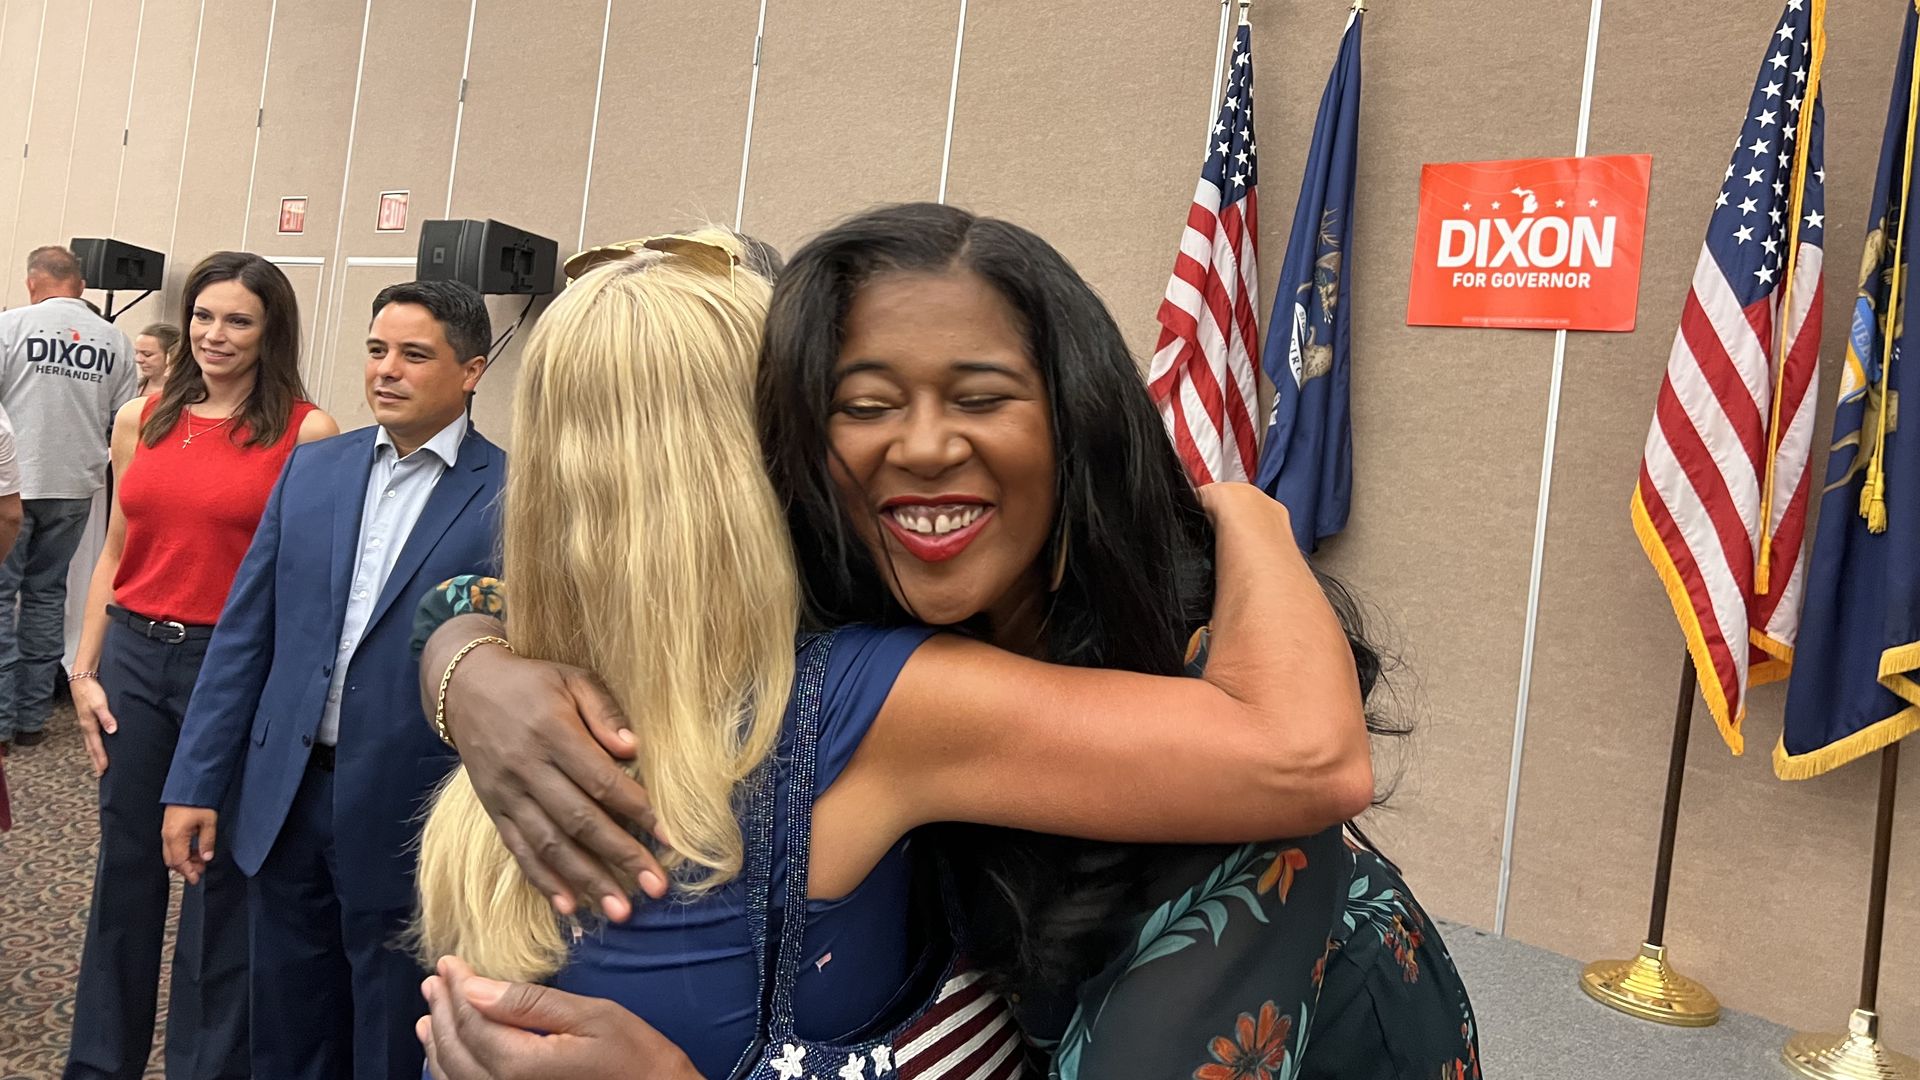 Republican SOS candidate Kristina Karamo hugs a supporter with gubernatorial and lt. gov. candidates Tudor Dixon and Shane Hernandez standing in the background.